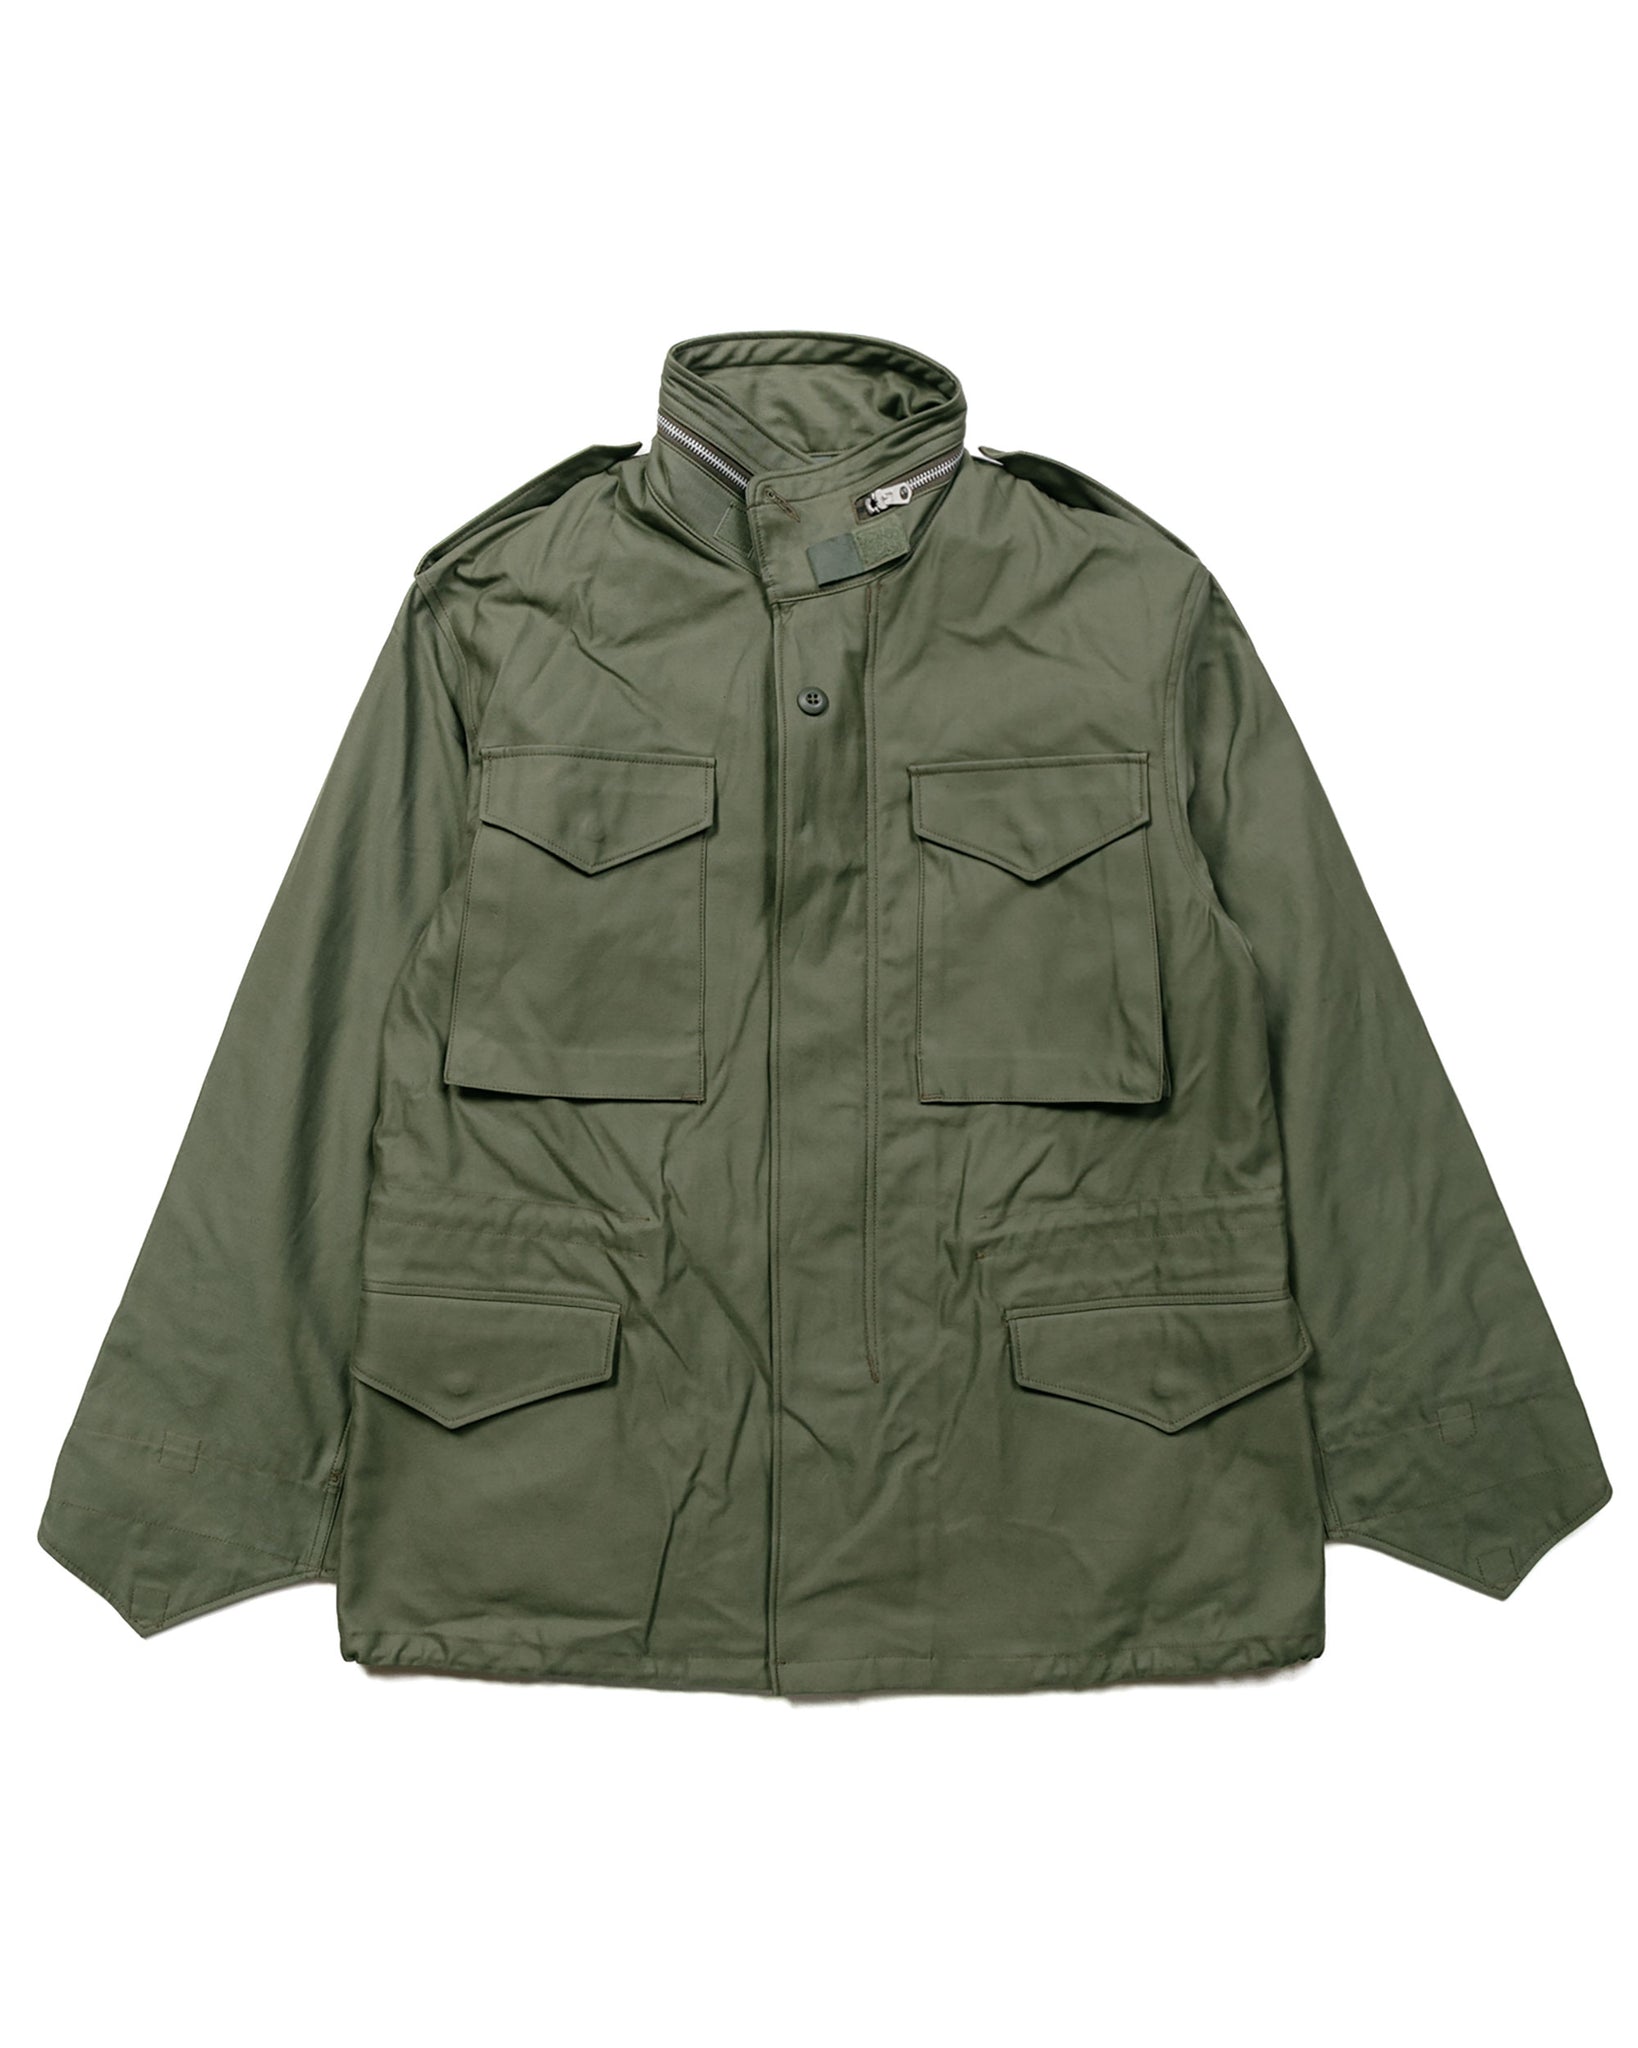 ◎2nd Model M-65 Field Jacket The REAL McCOY'S フライトジャケット ...